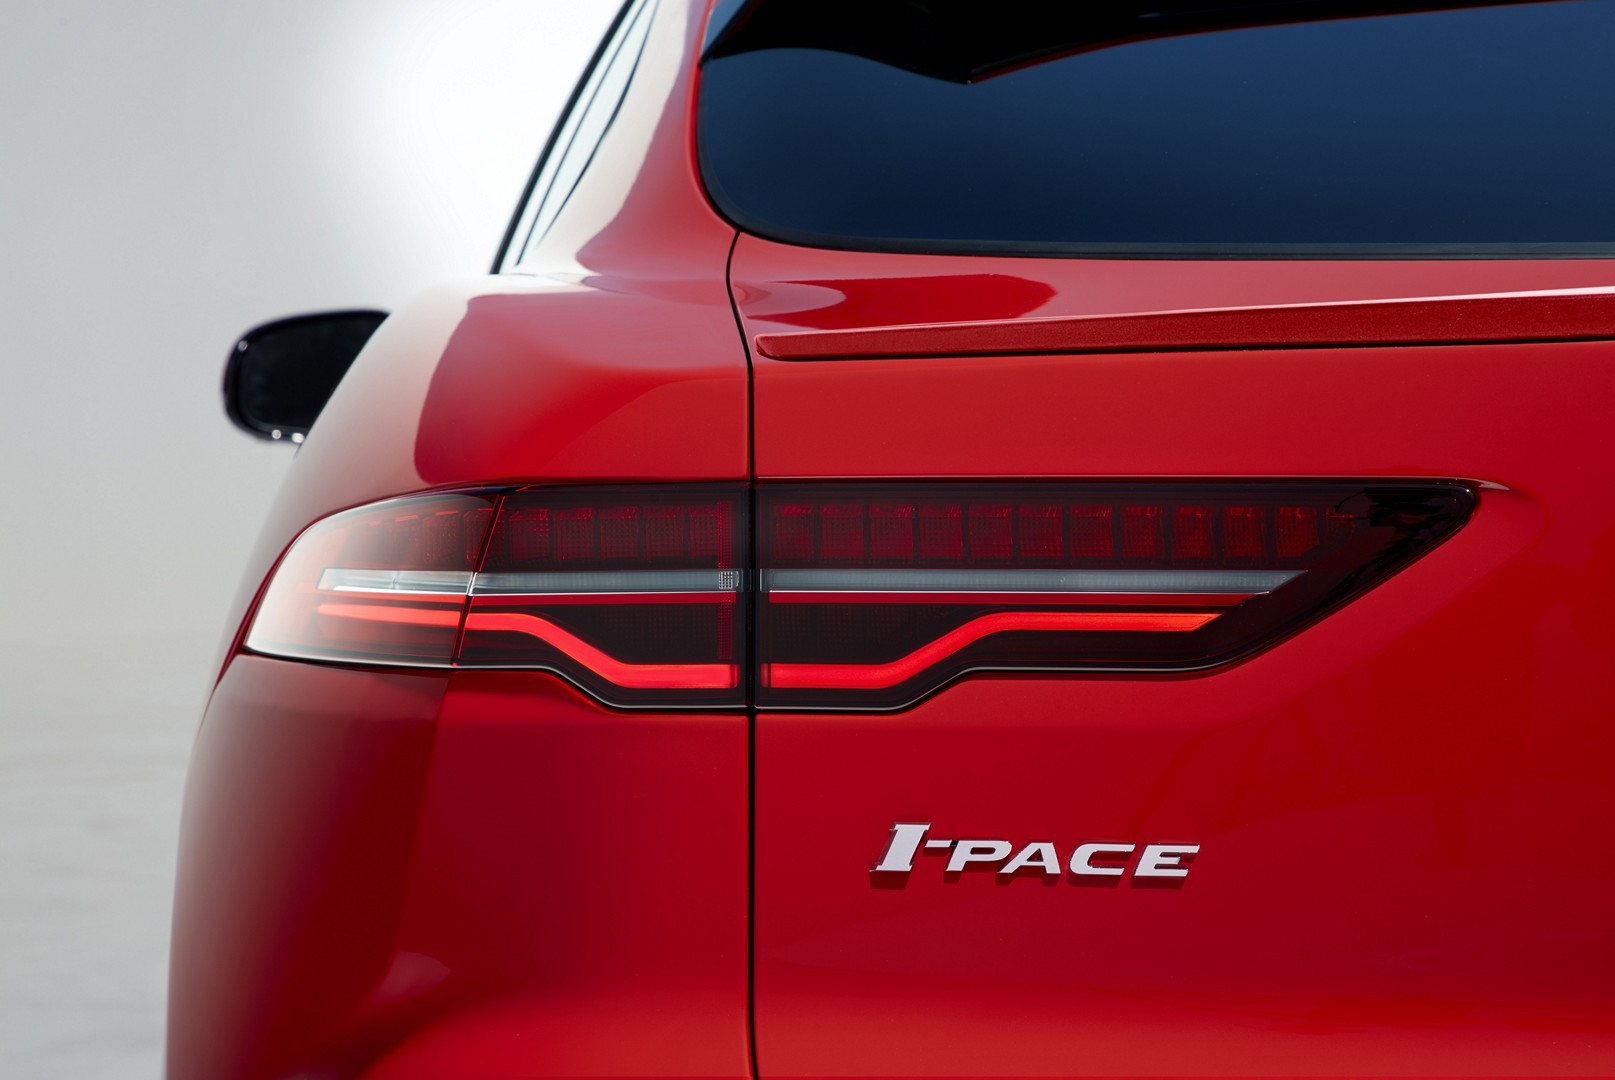 https://s1.cdn.autoevolution.com/images/news/gallery/2020-jaguar-i-pace-update-offers-234-miles-of-range-thanks-to-etrophy-know-how_88.jpg